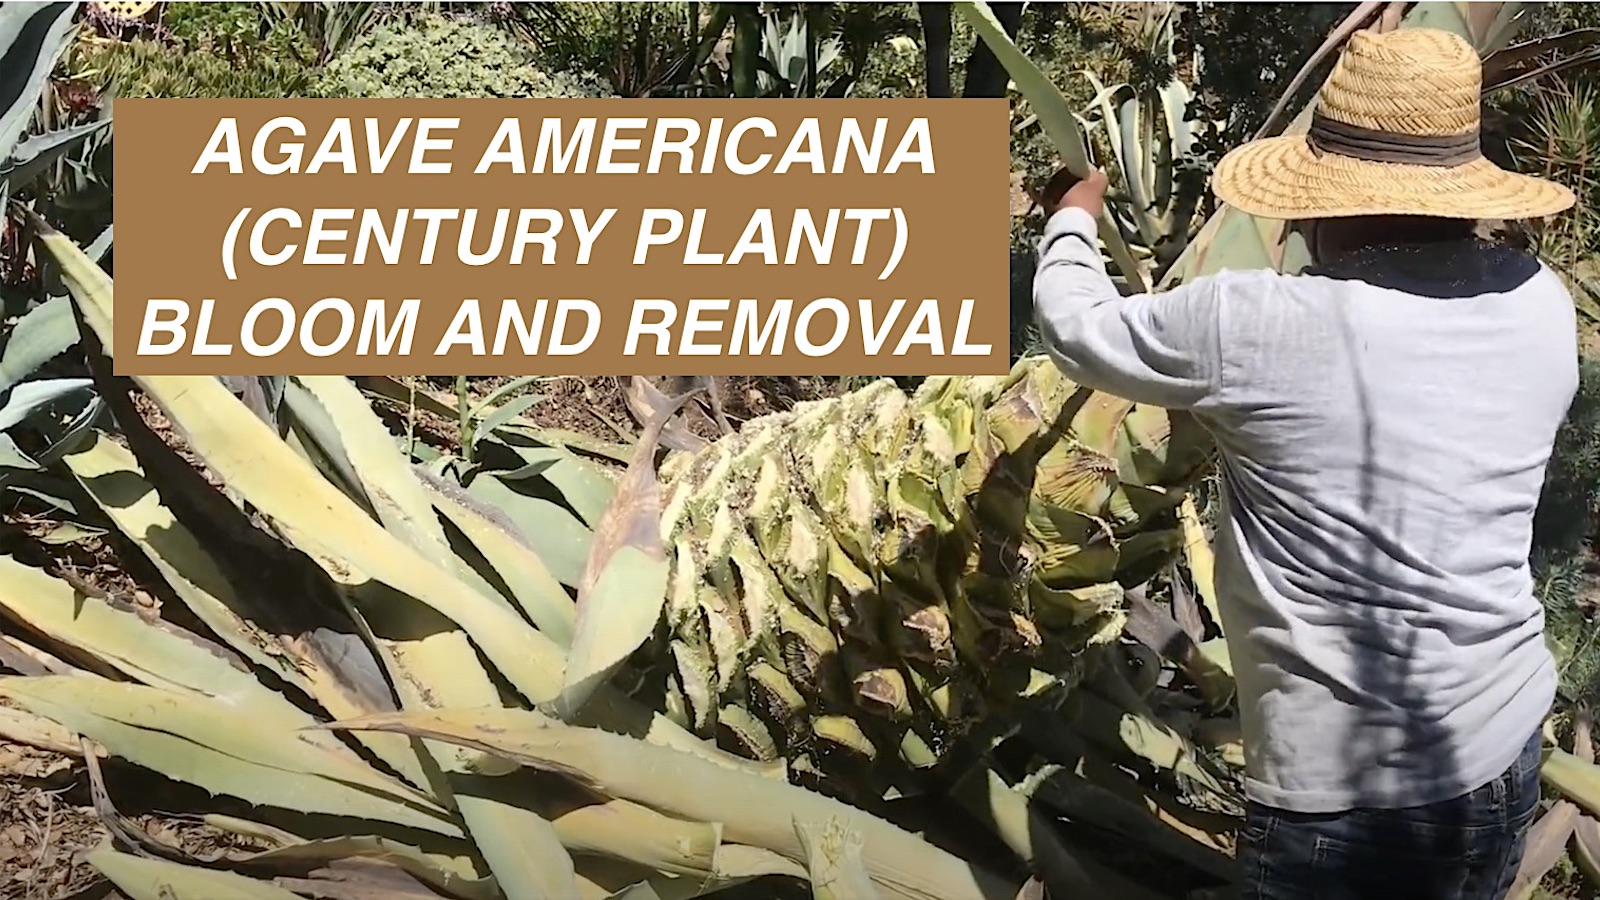 Agave americana bloom and removal 